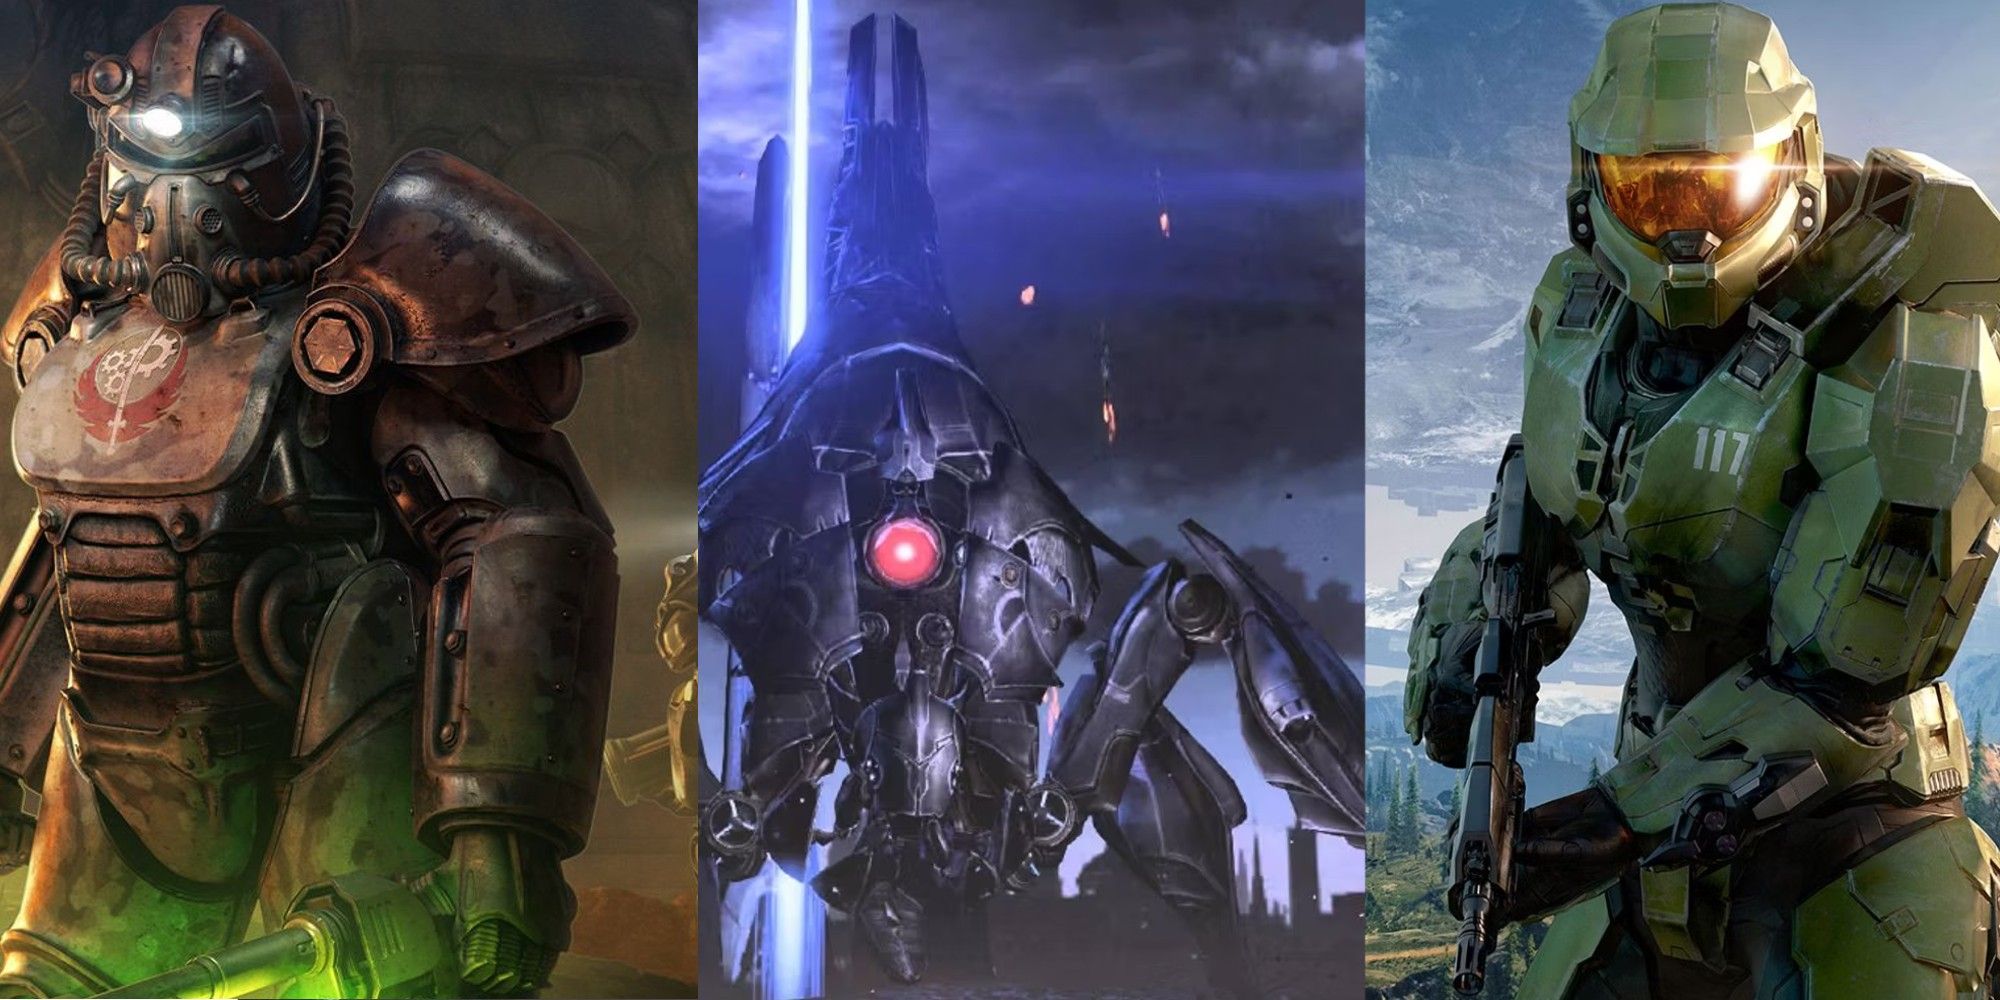 Brotherhood Of Steel Knight, A Reaper, And Masterchief